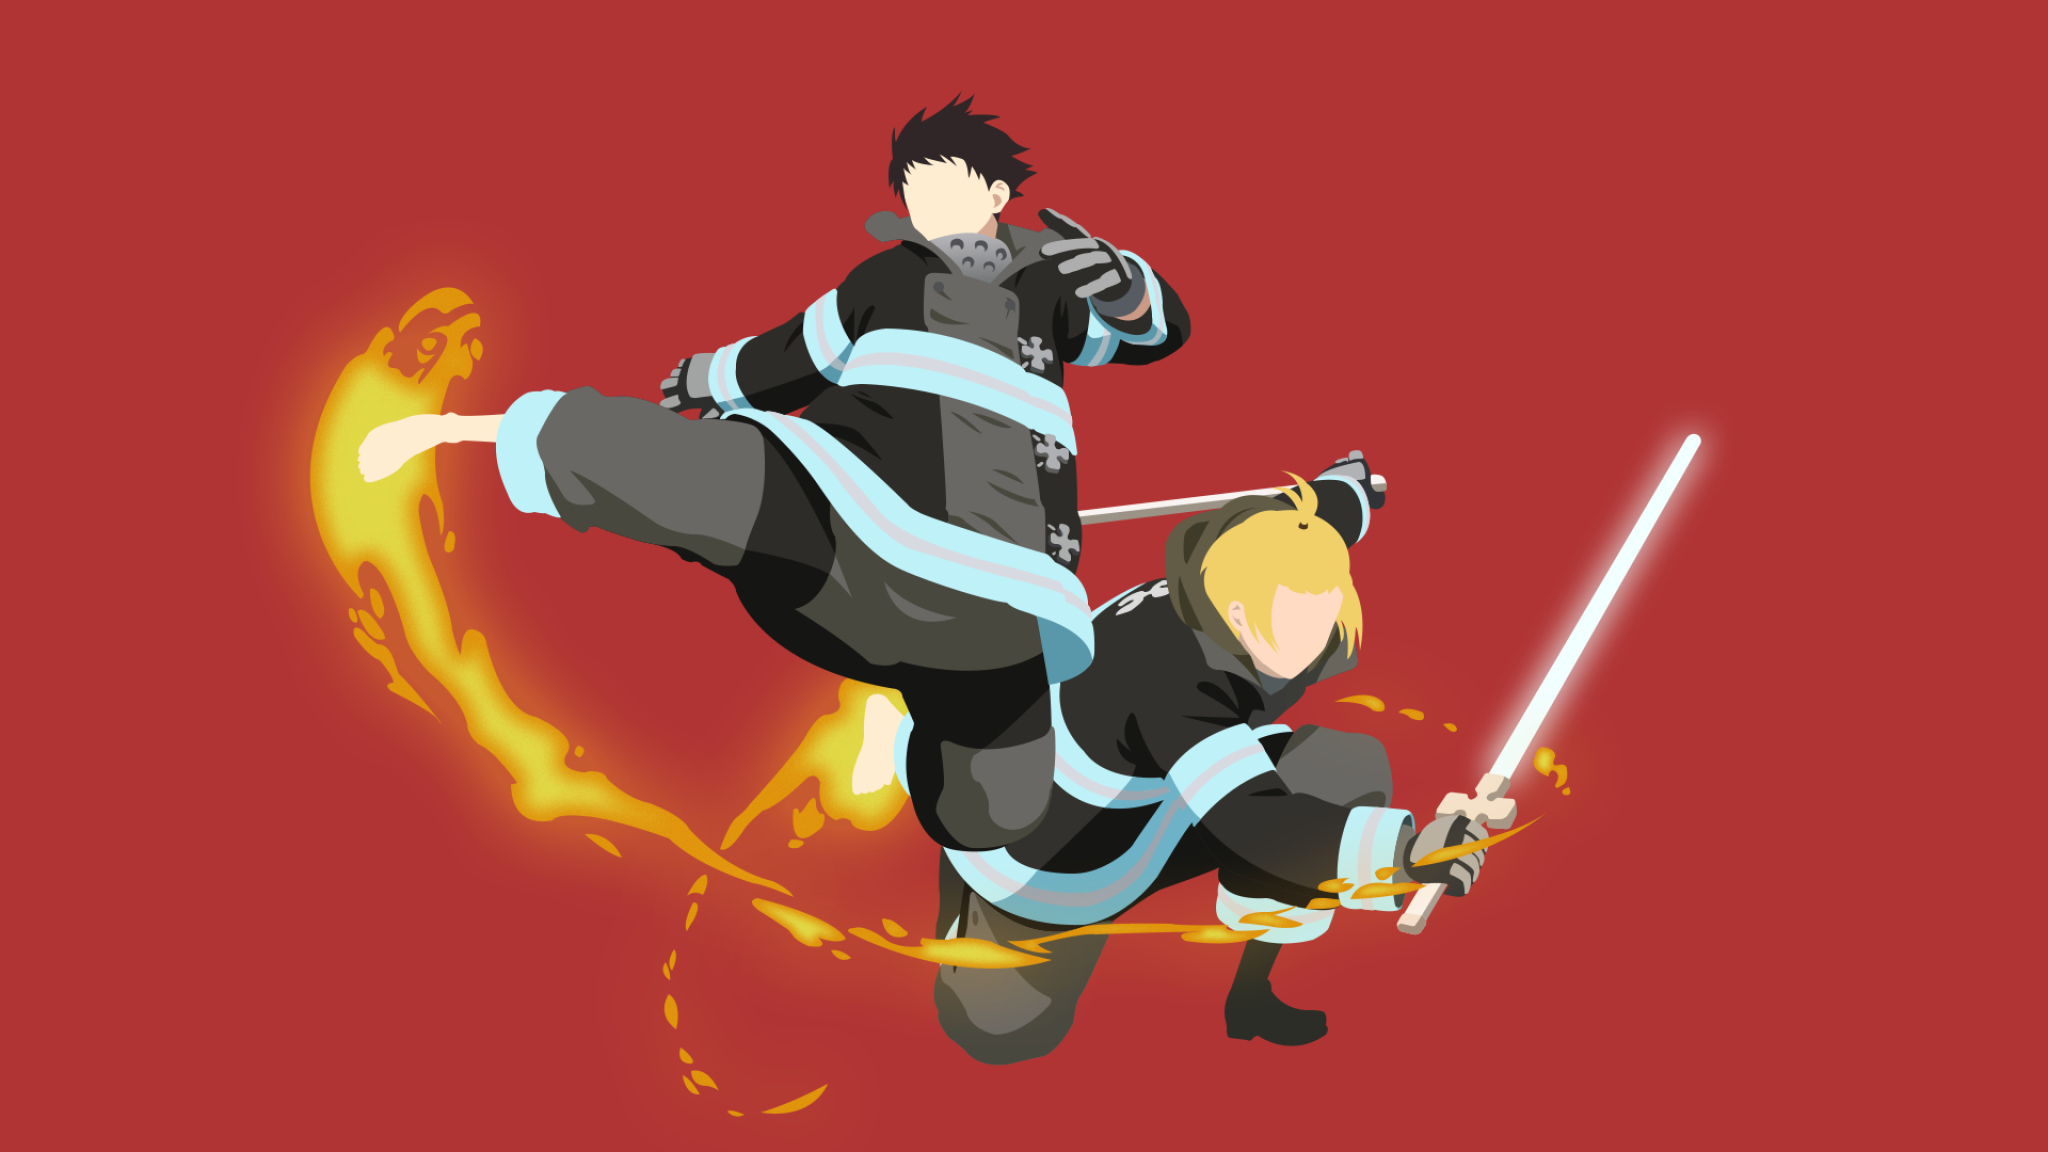 2048x1152 Fire Force Anime 2048x1152 Resolution Wallpaper Hd Minimalist 4k Wallpapers Images Photos And Background